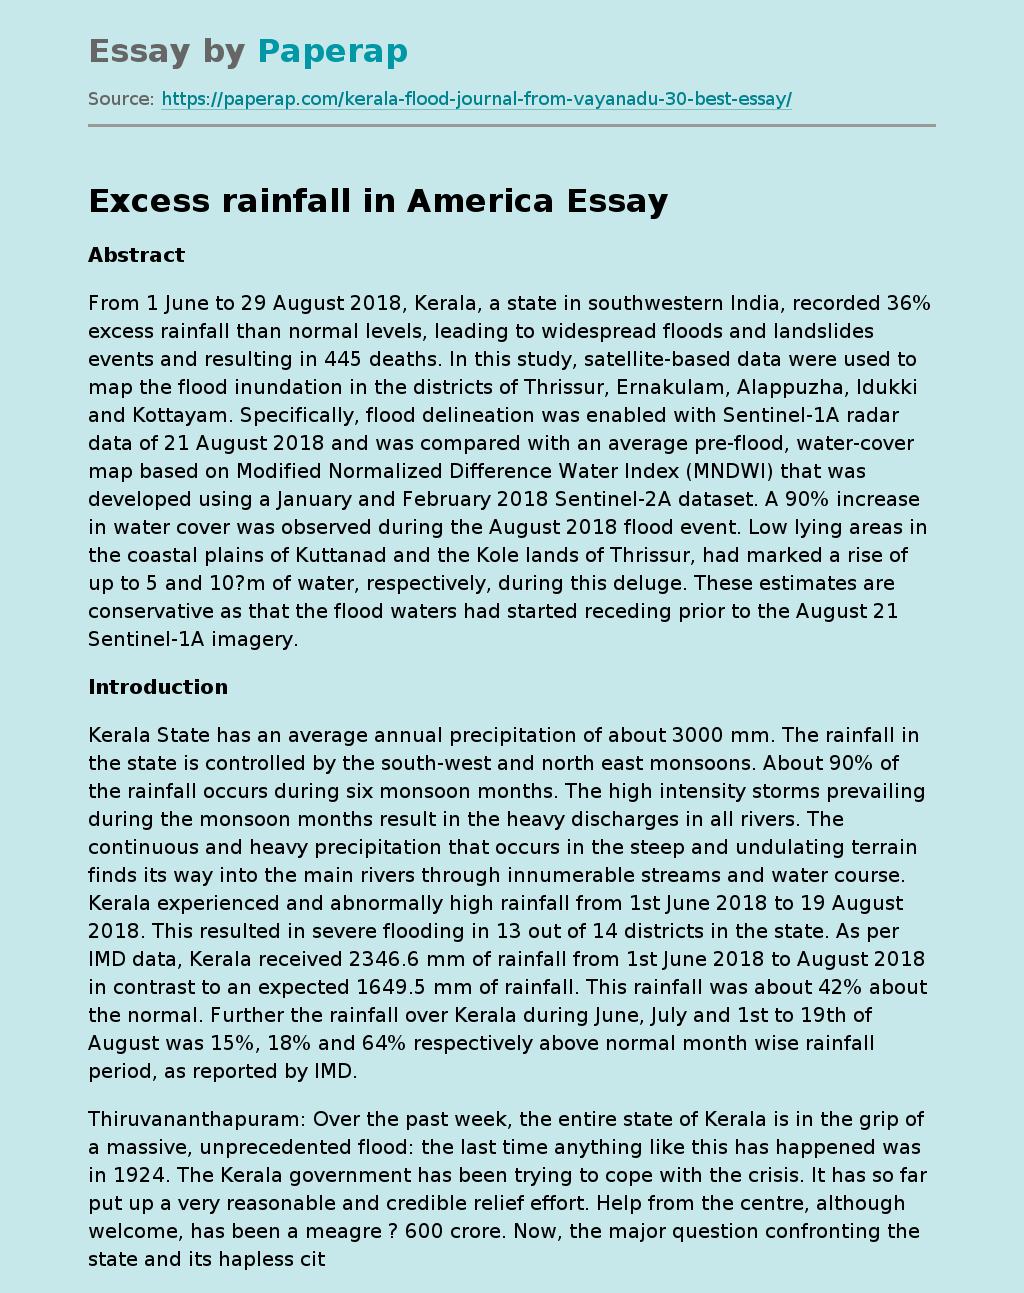 Excess rainfall in America